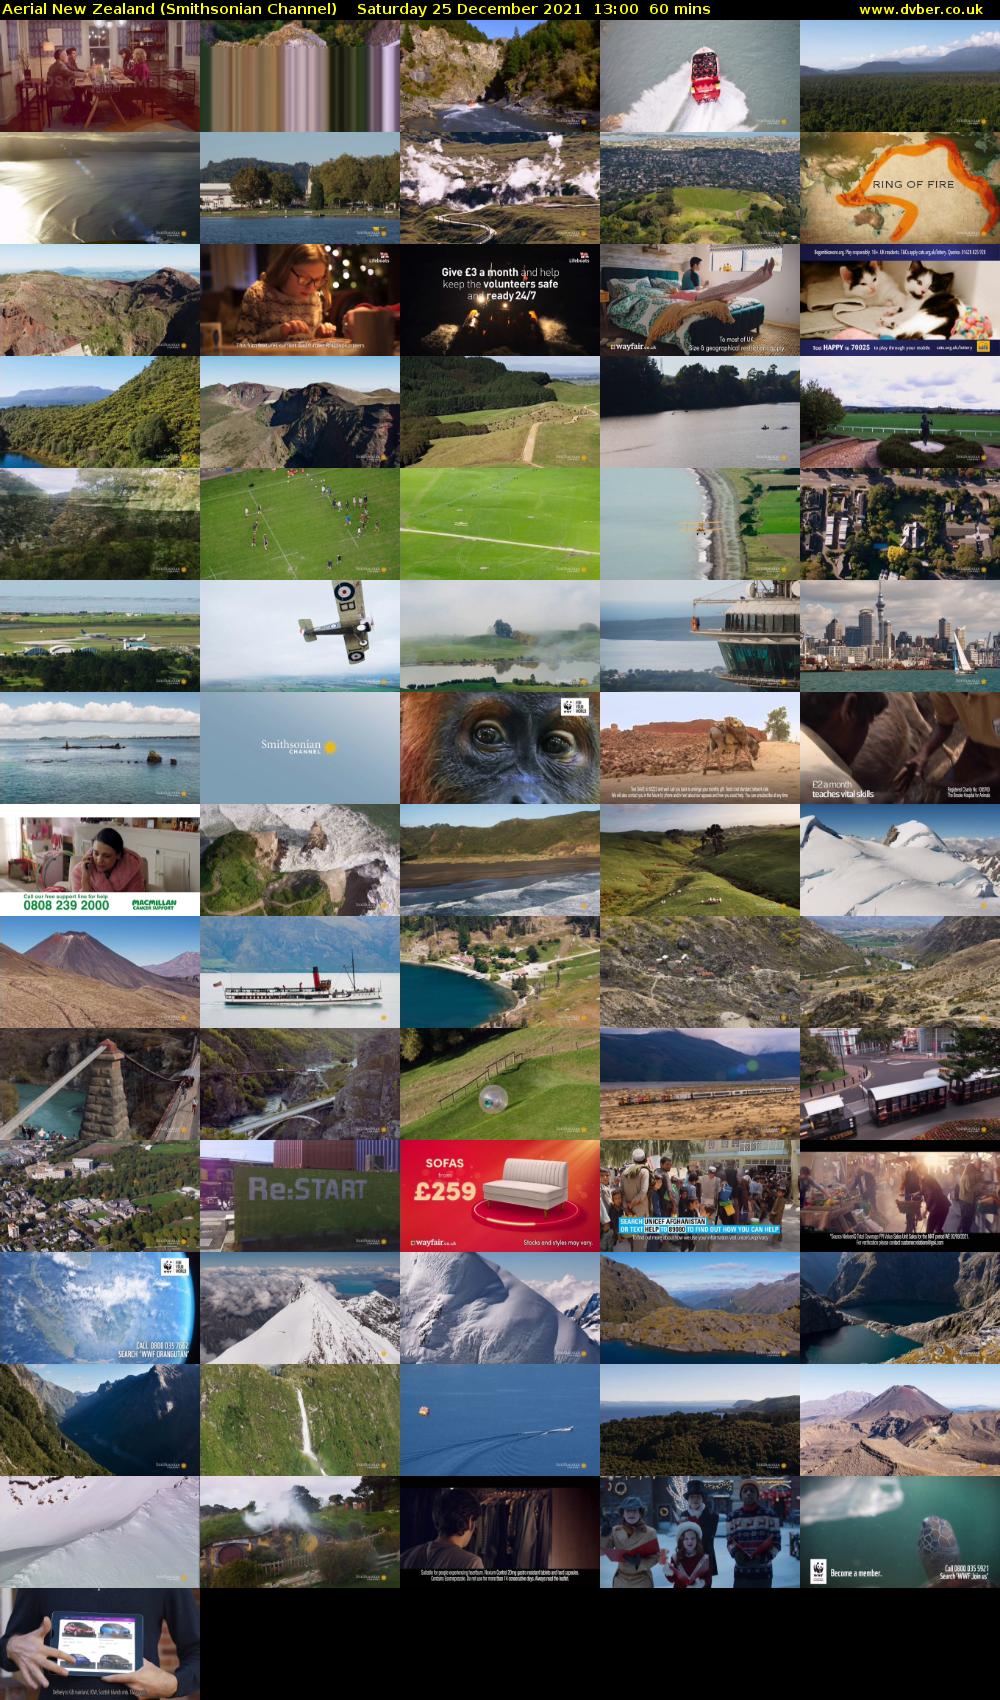 Aerial New Zealand (Smithsonian Channel) Saturday 25 December 2021 13:00 - 14:00